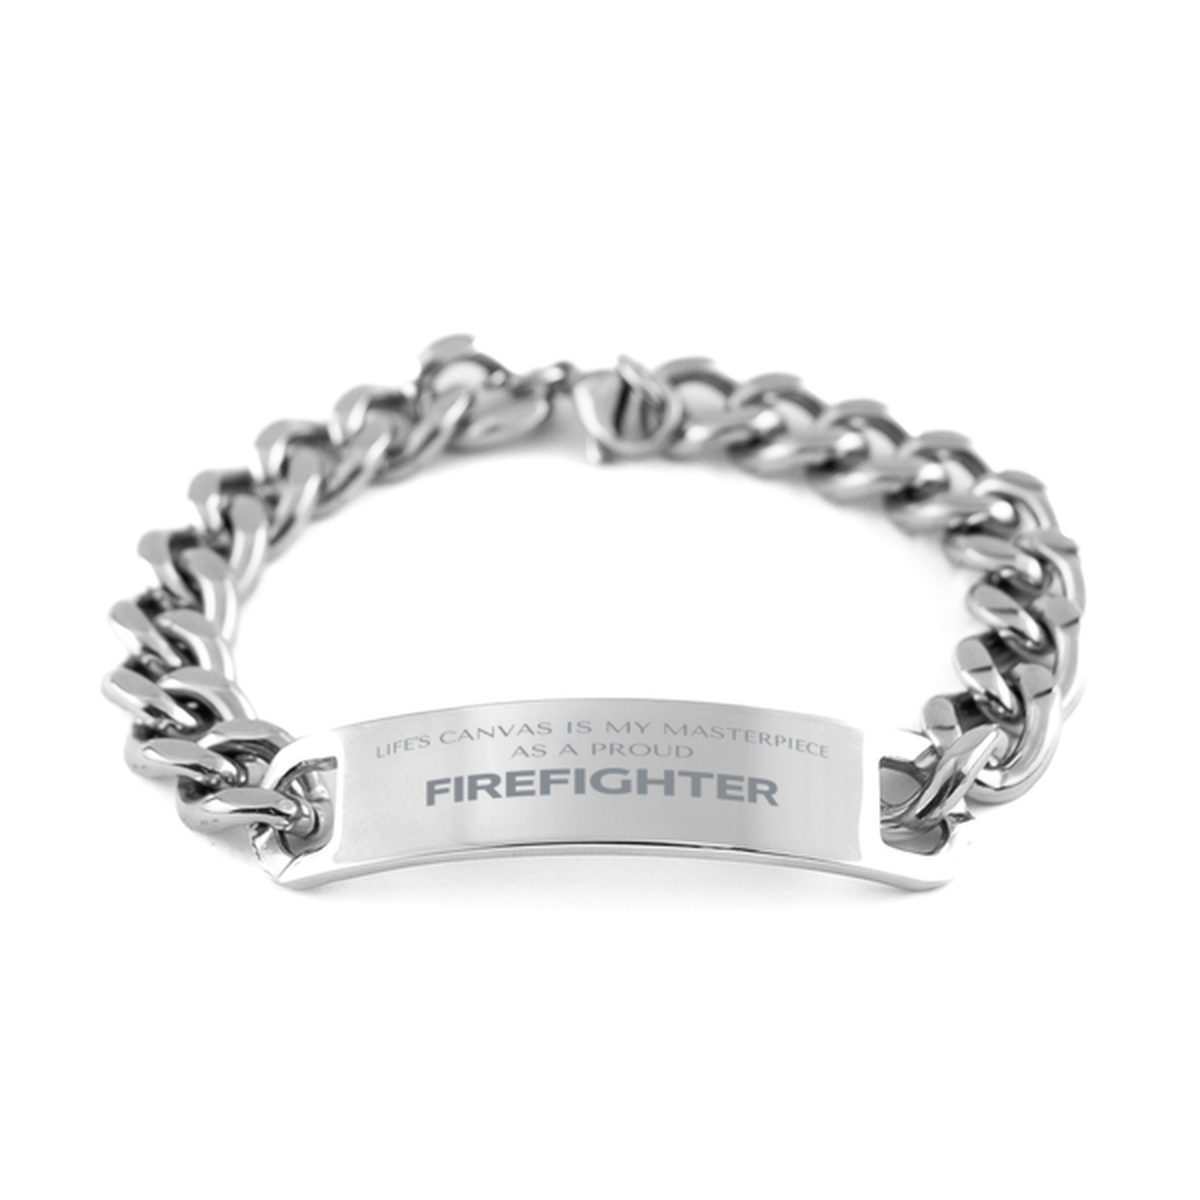 Proud Firefighter Gifts, Life's canvas is my masterpiece, Epic Birthday Christmas Unique Cuban Chain Stainless Steel Bracelet For Firefighter, Coworkers, Men, Women, Friends